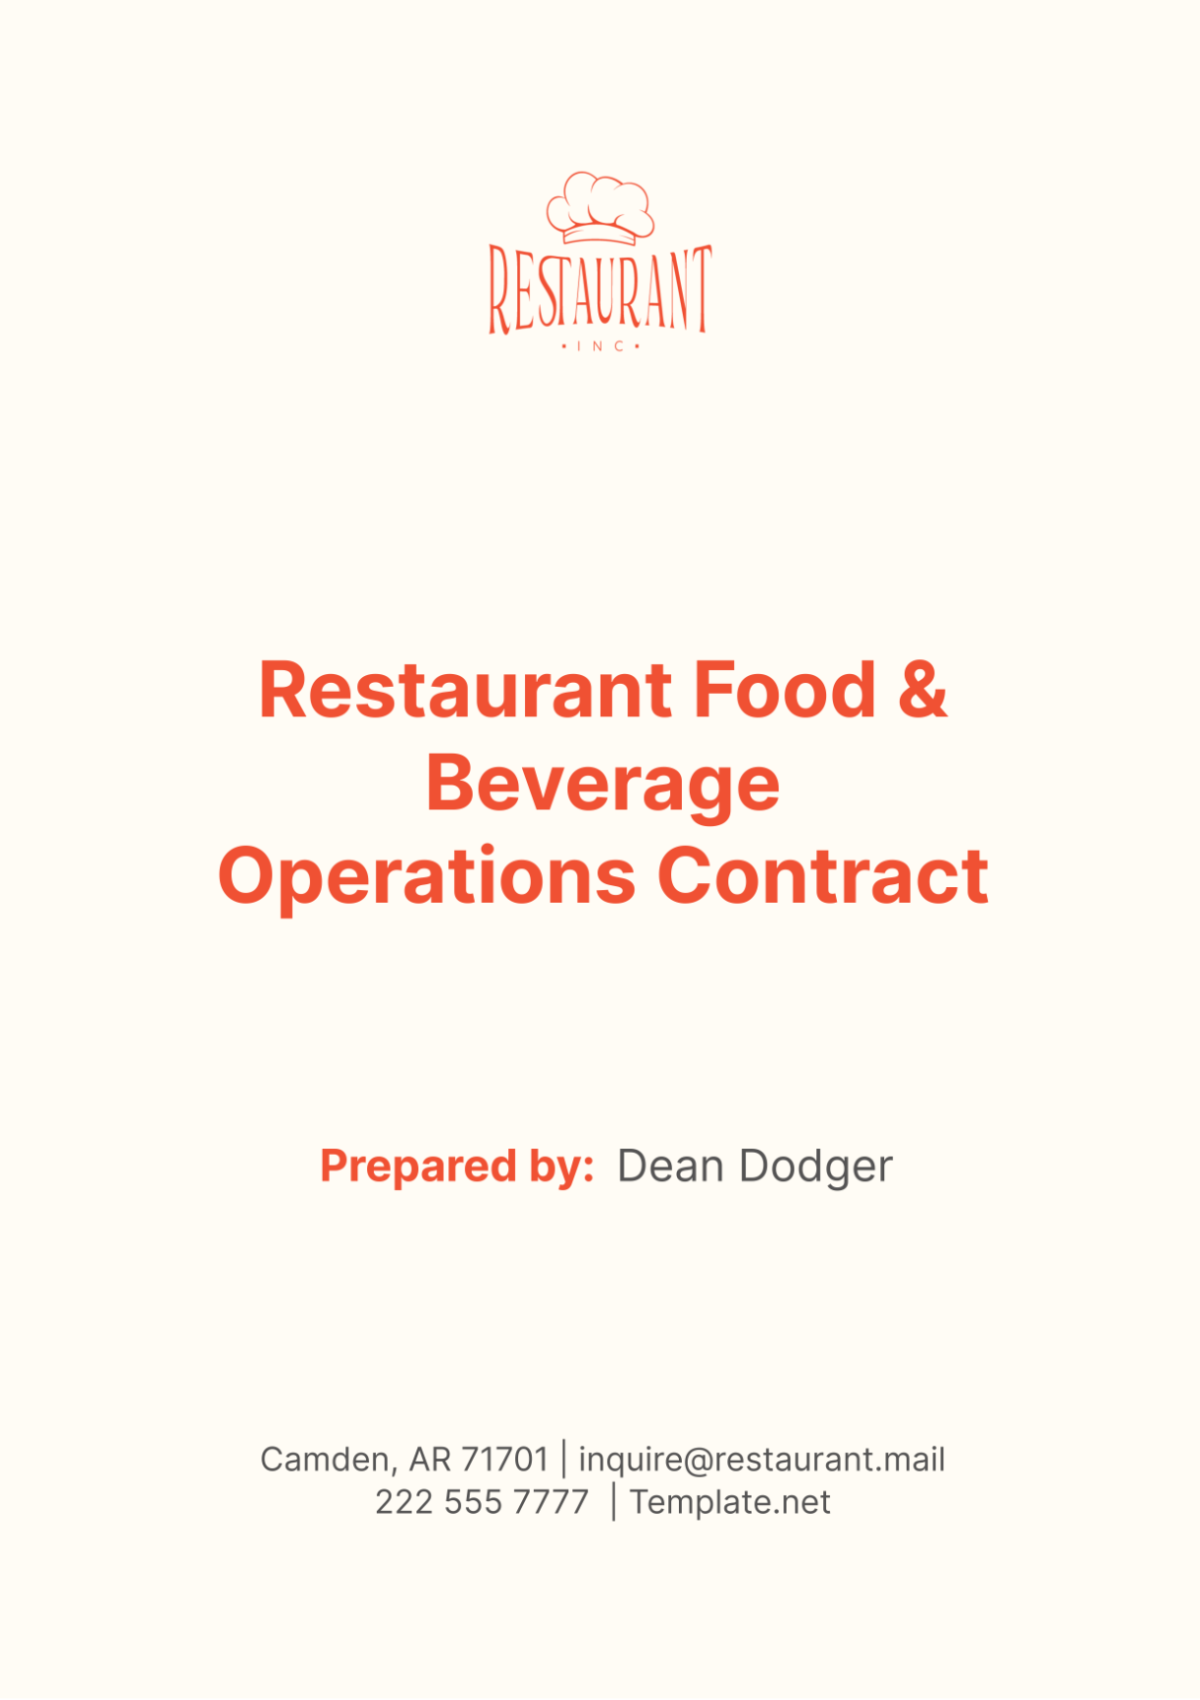 Free Restaurant Food & Beverage Operations Contract Template